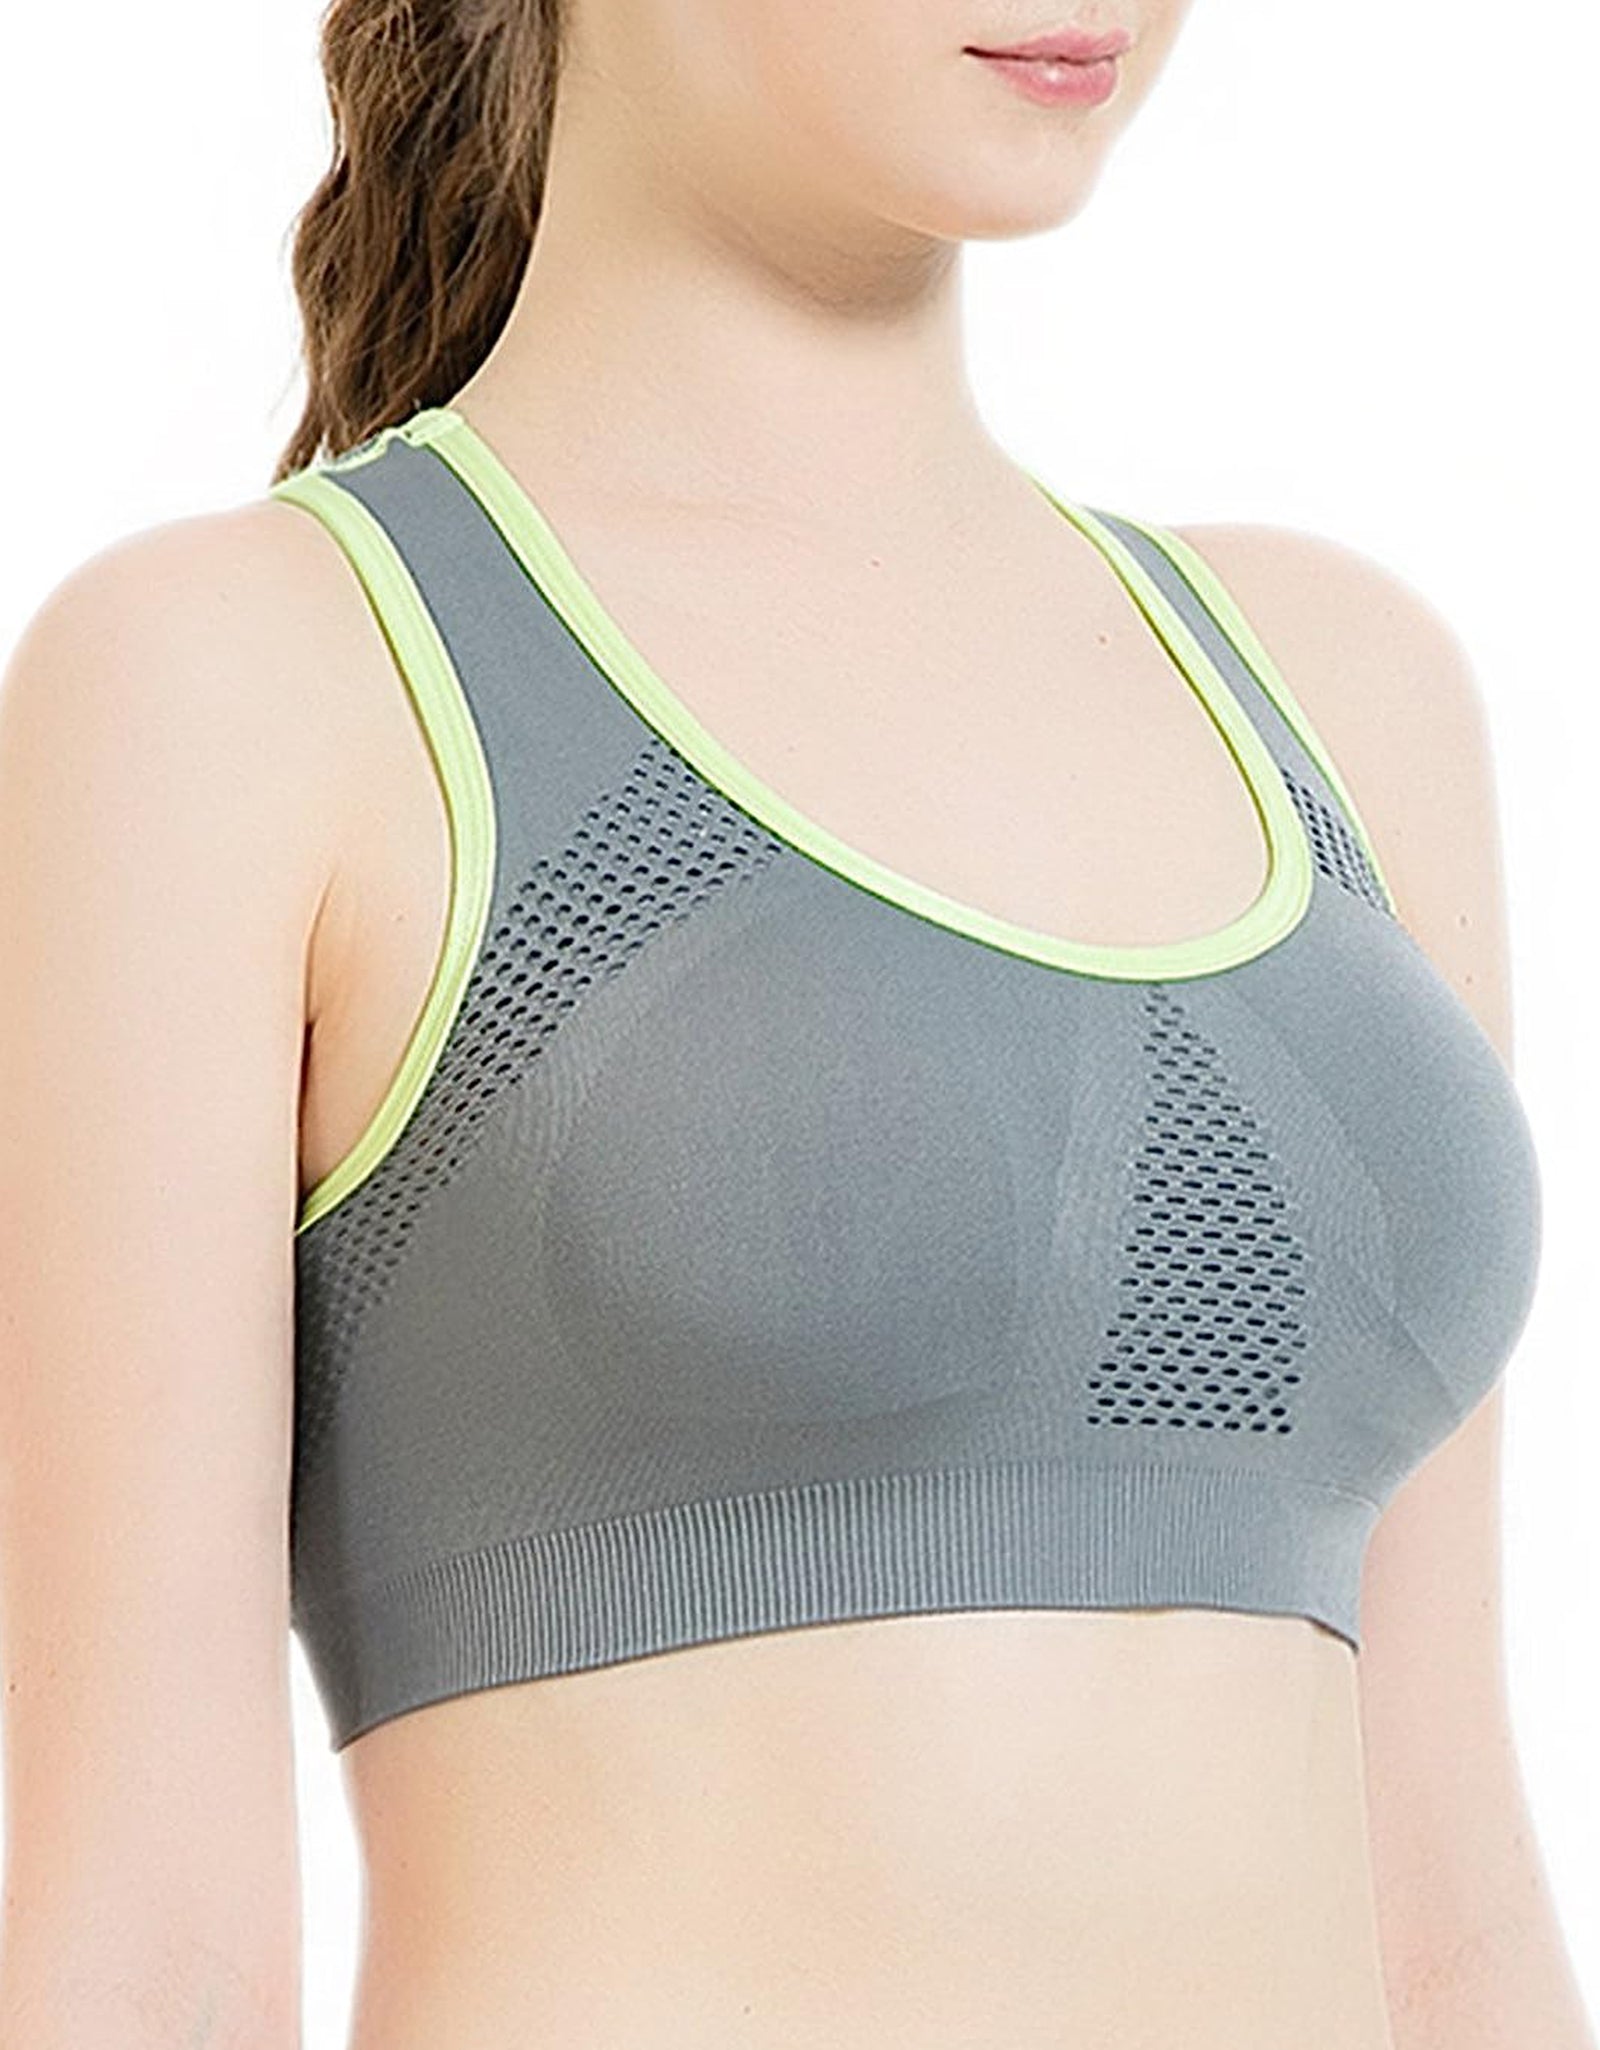 Women's Workout Sports Bras Fitness One Shoulder Yoga Cutout Bralette  Athletic Running Gym Quick Dry Brassiere Top Army Green at  Women's  Clothing store